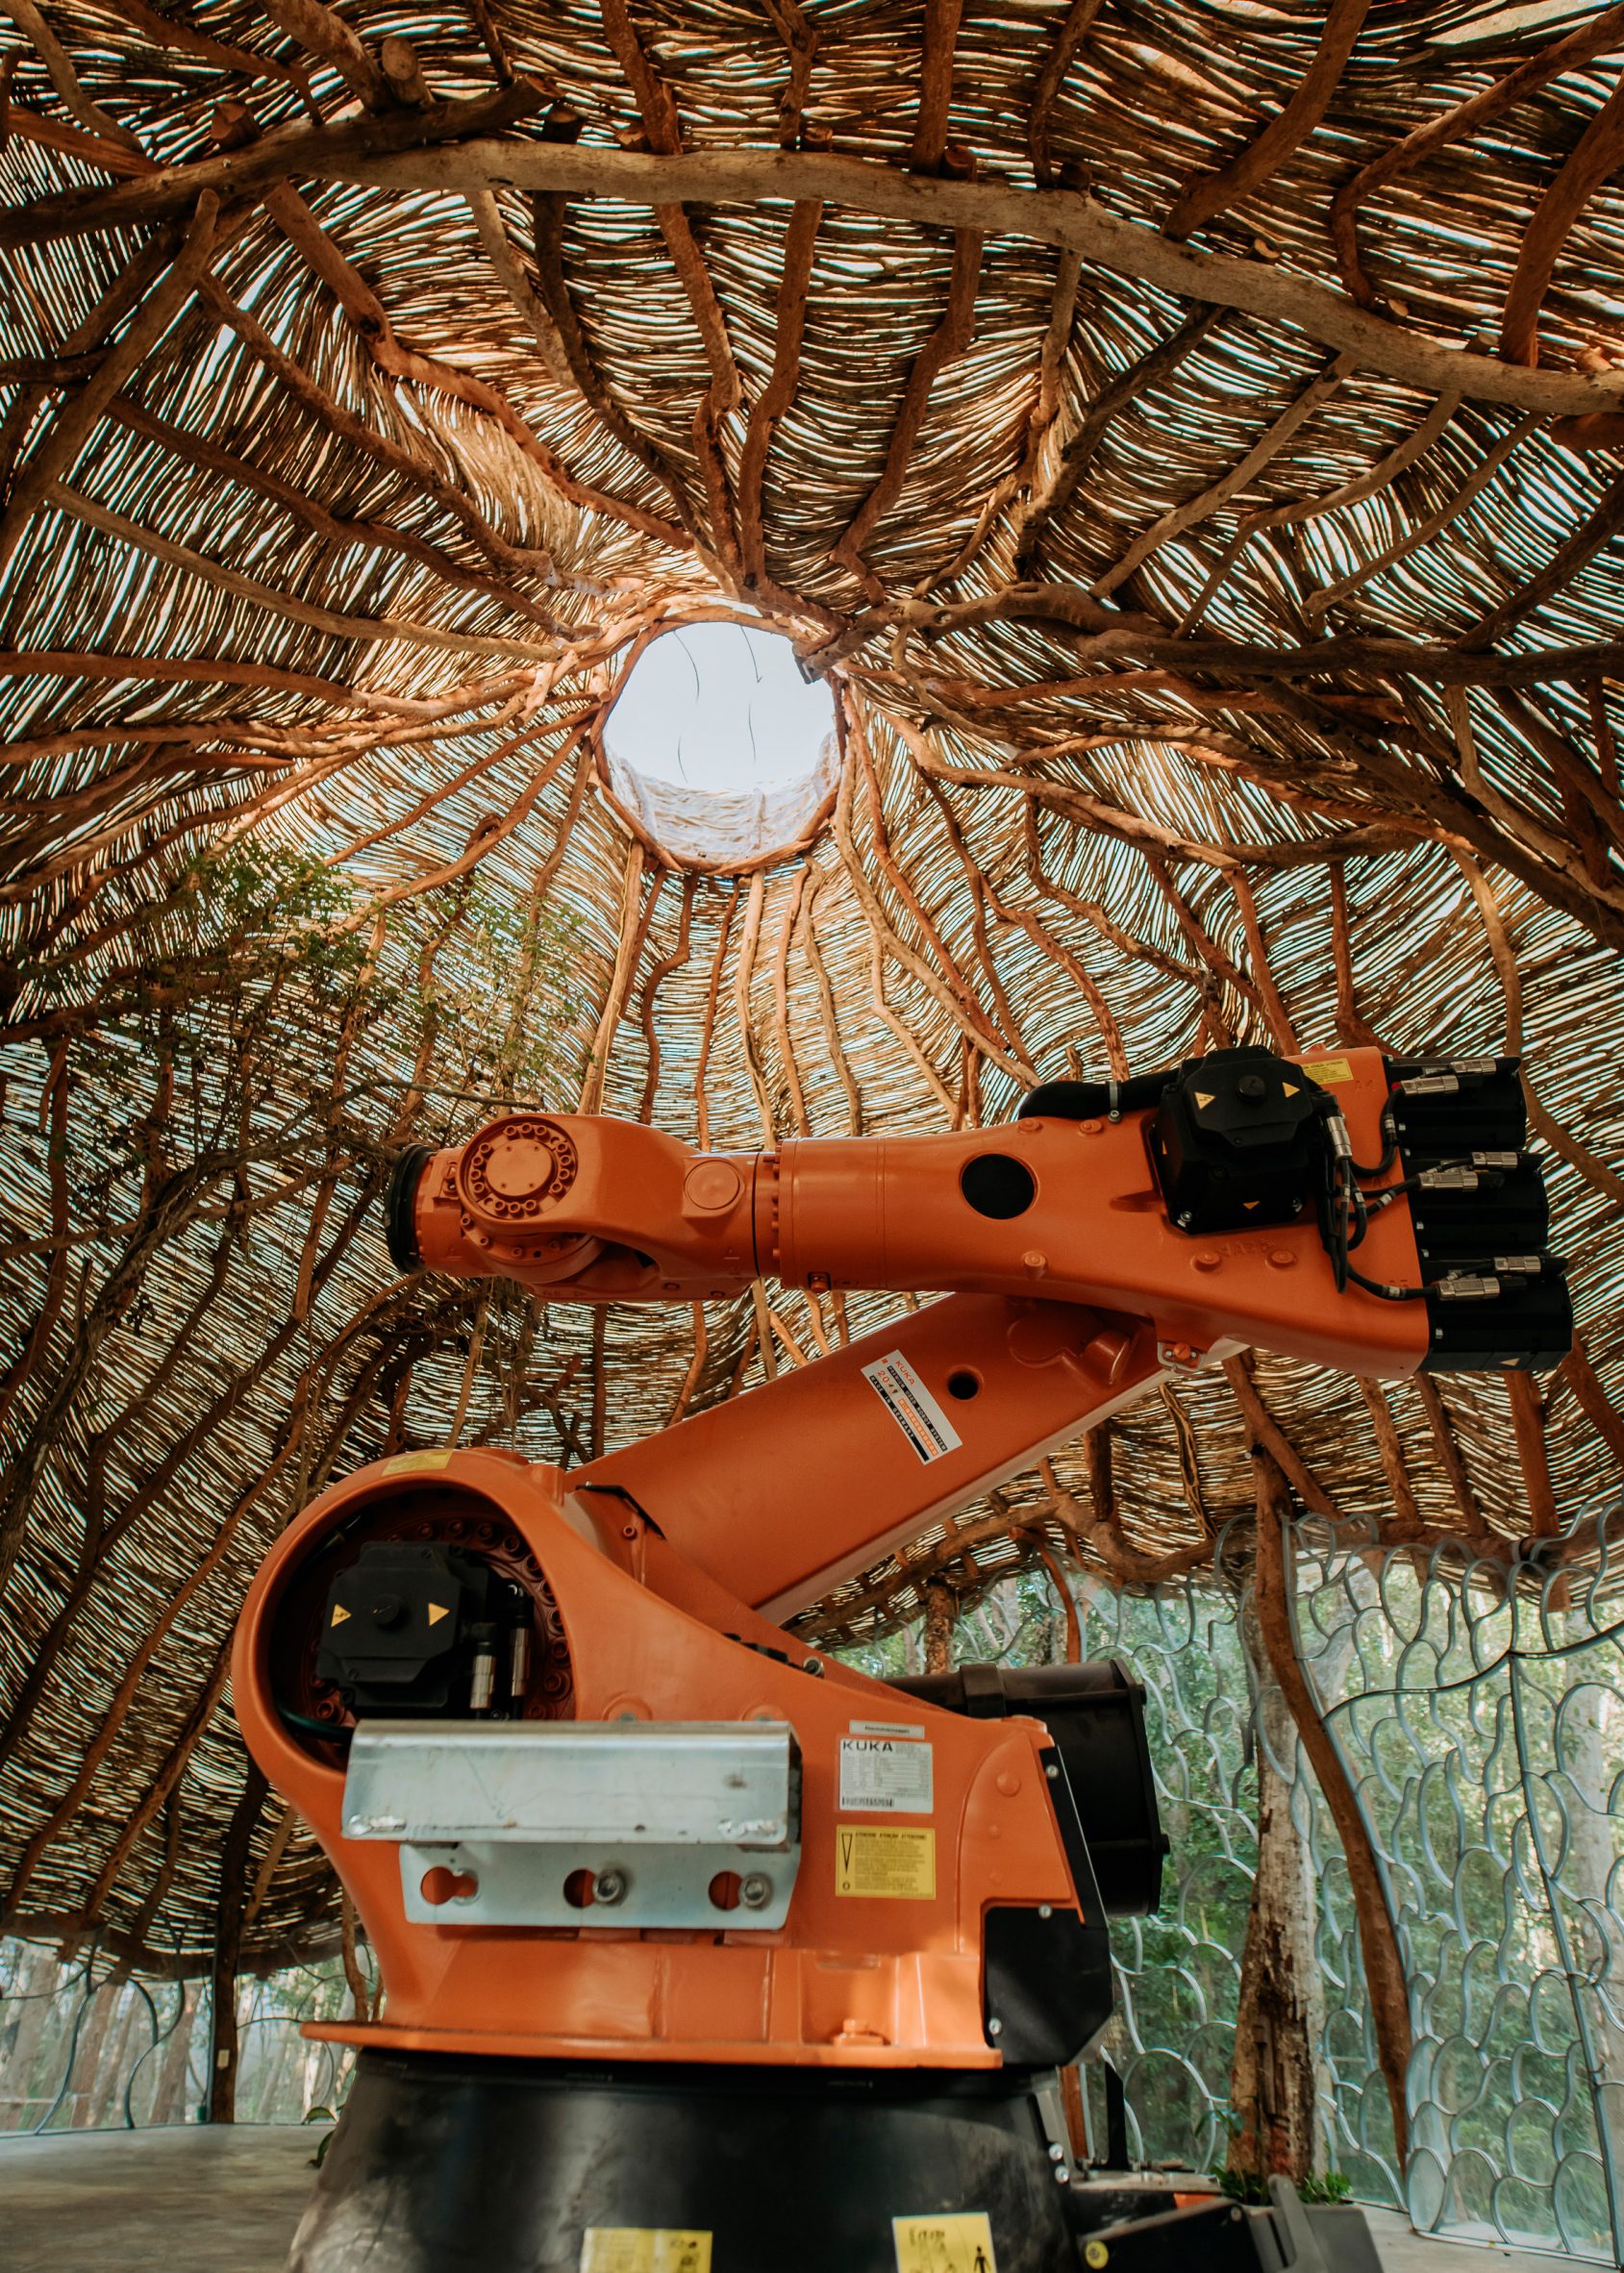 A robot underneath a dome made of sticks